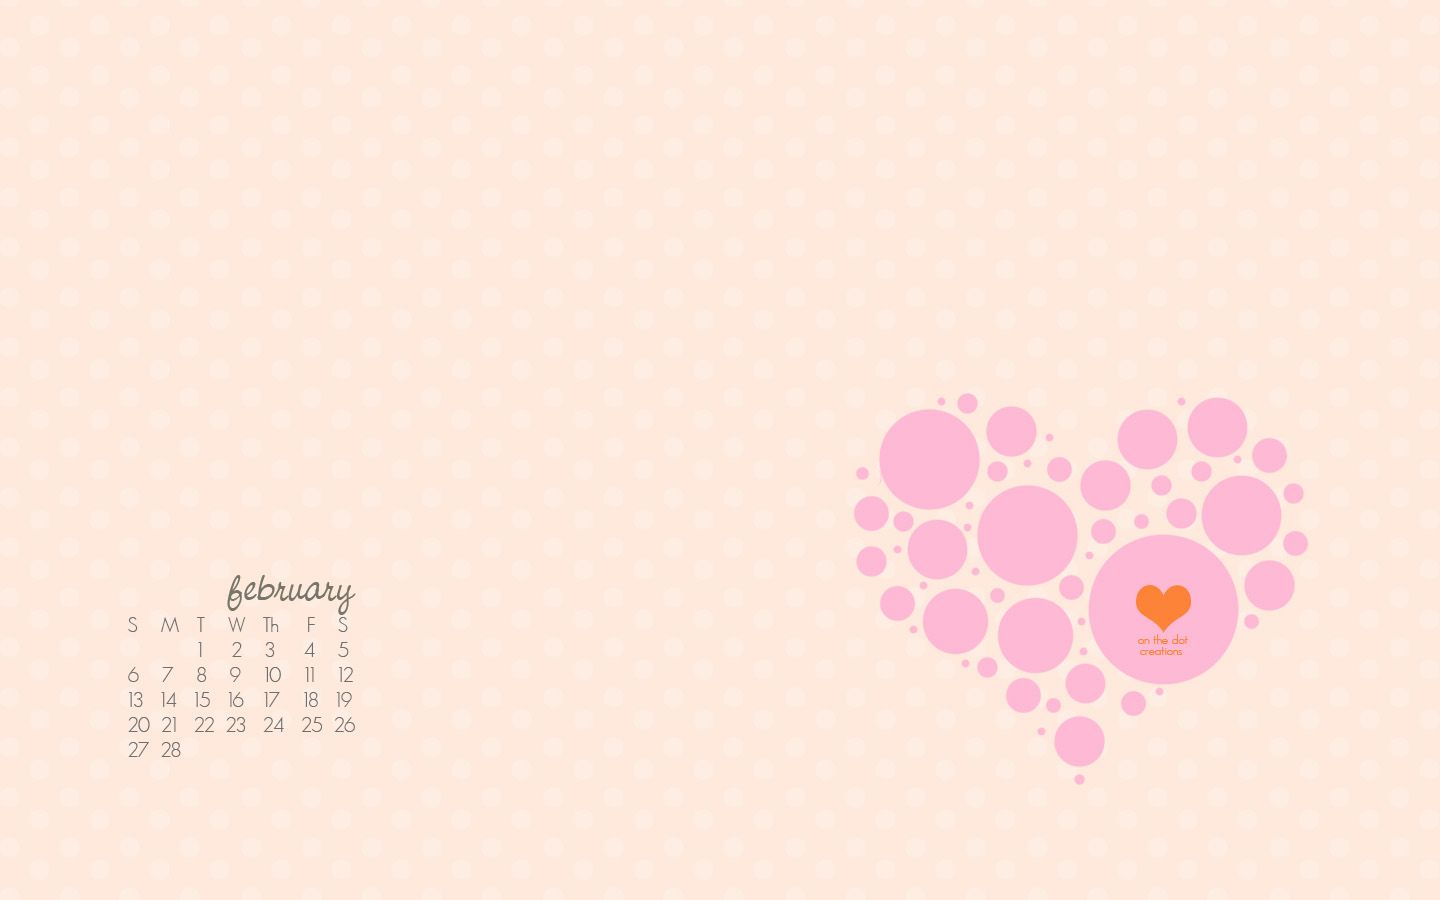 A February 2011 Desktop Wallpaper for You On the Dot Creations